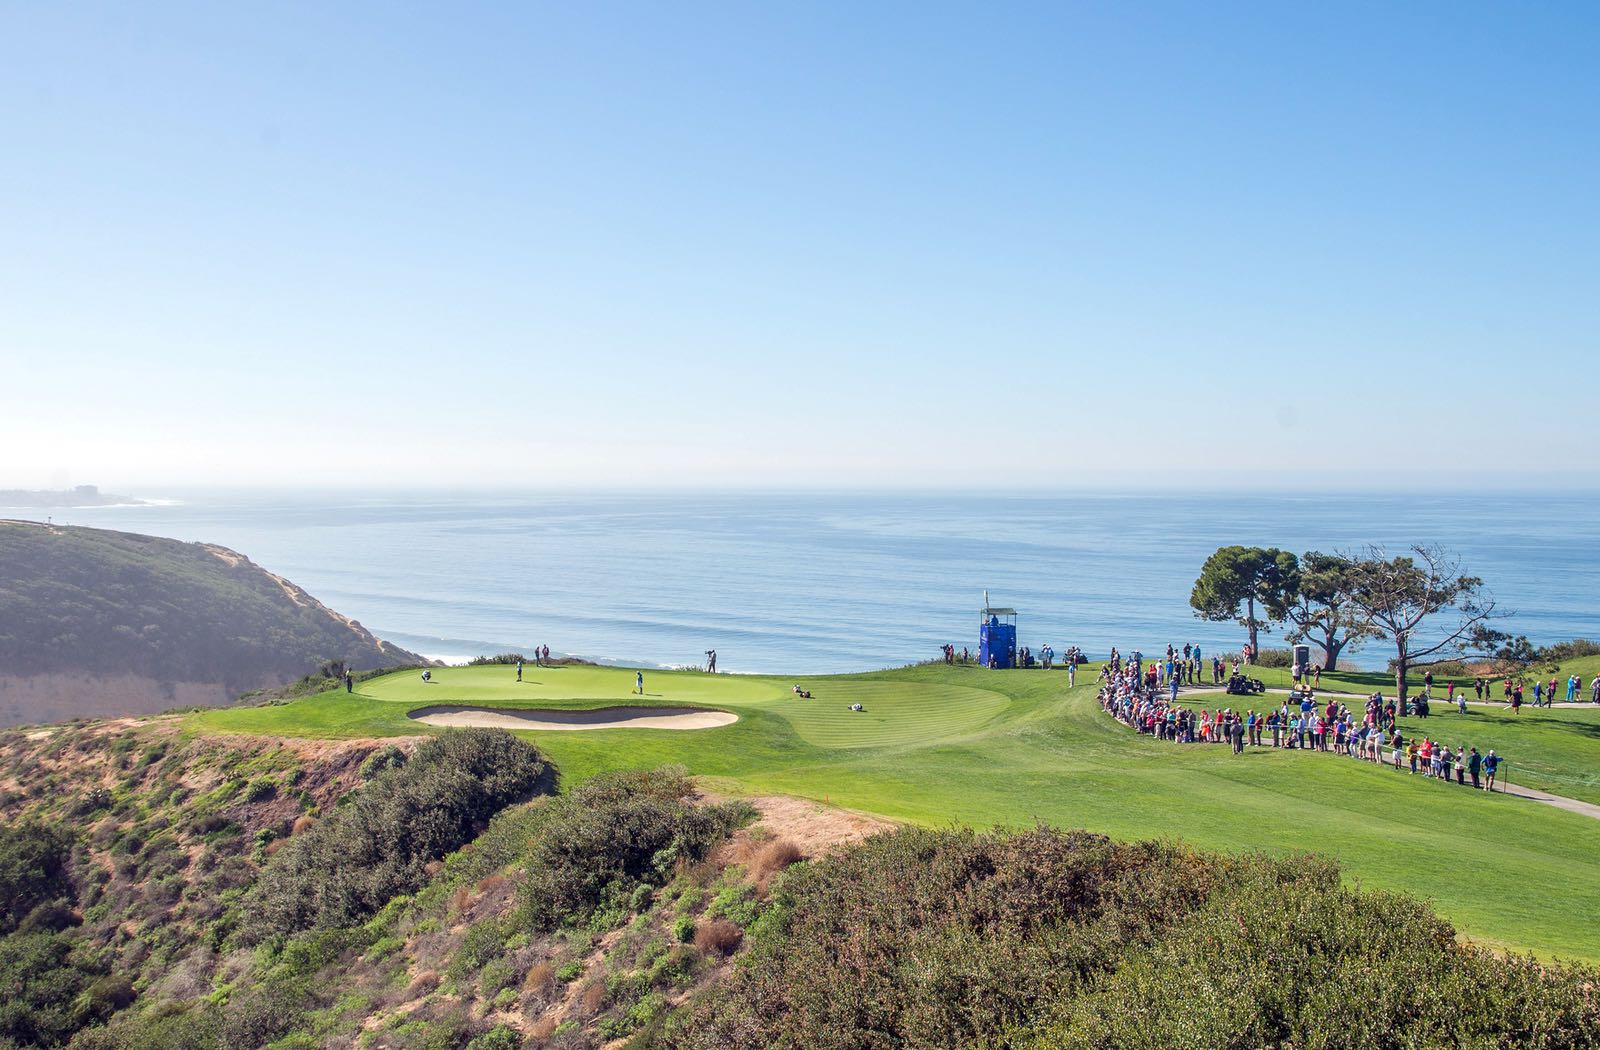 Farmers Insurance Open - Top Things to Do in San Diego